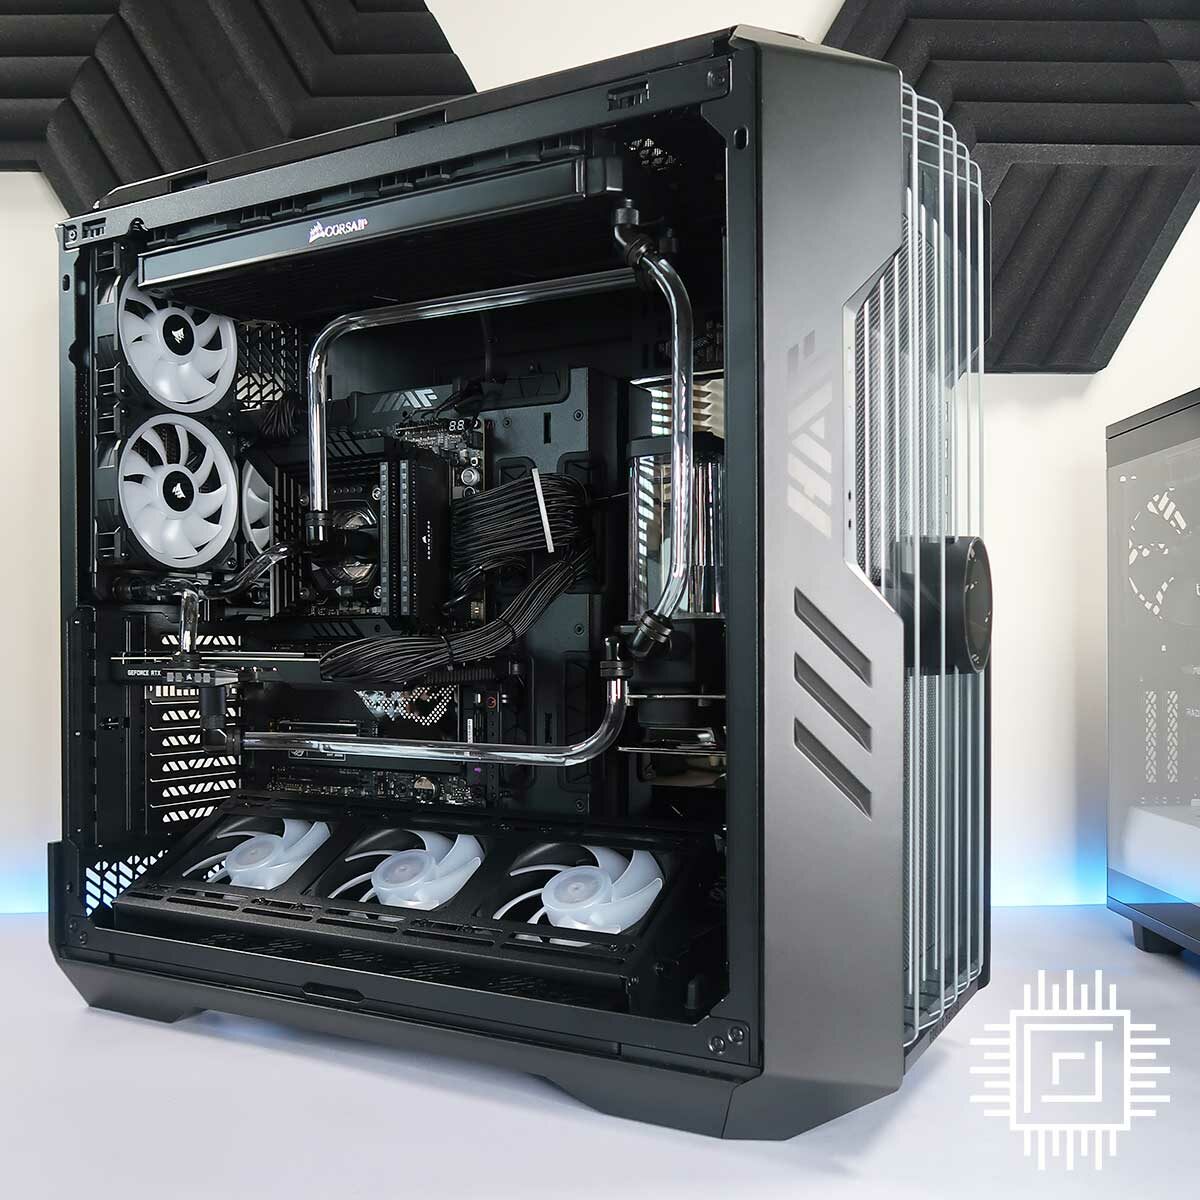 PCSpecialist Blade Ultra - A Giant PC